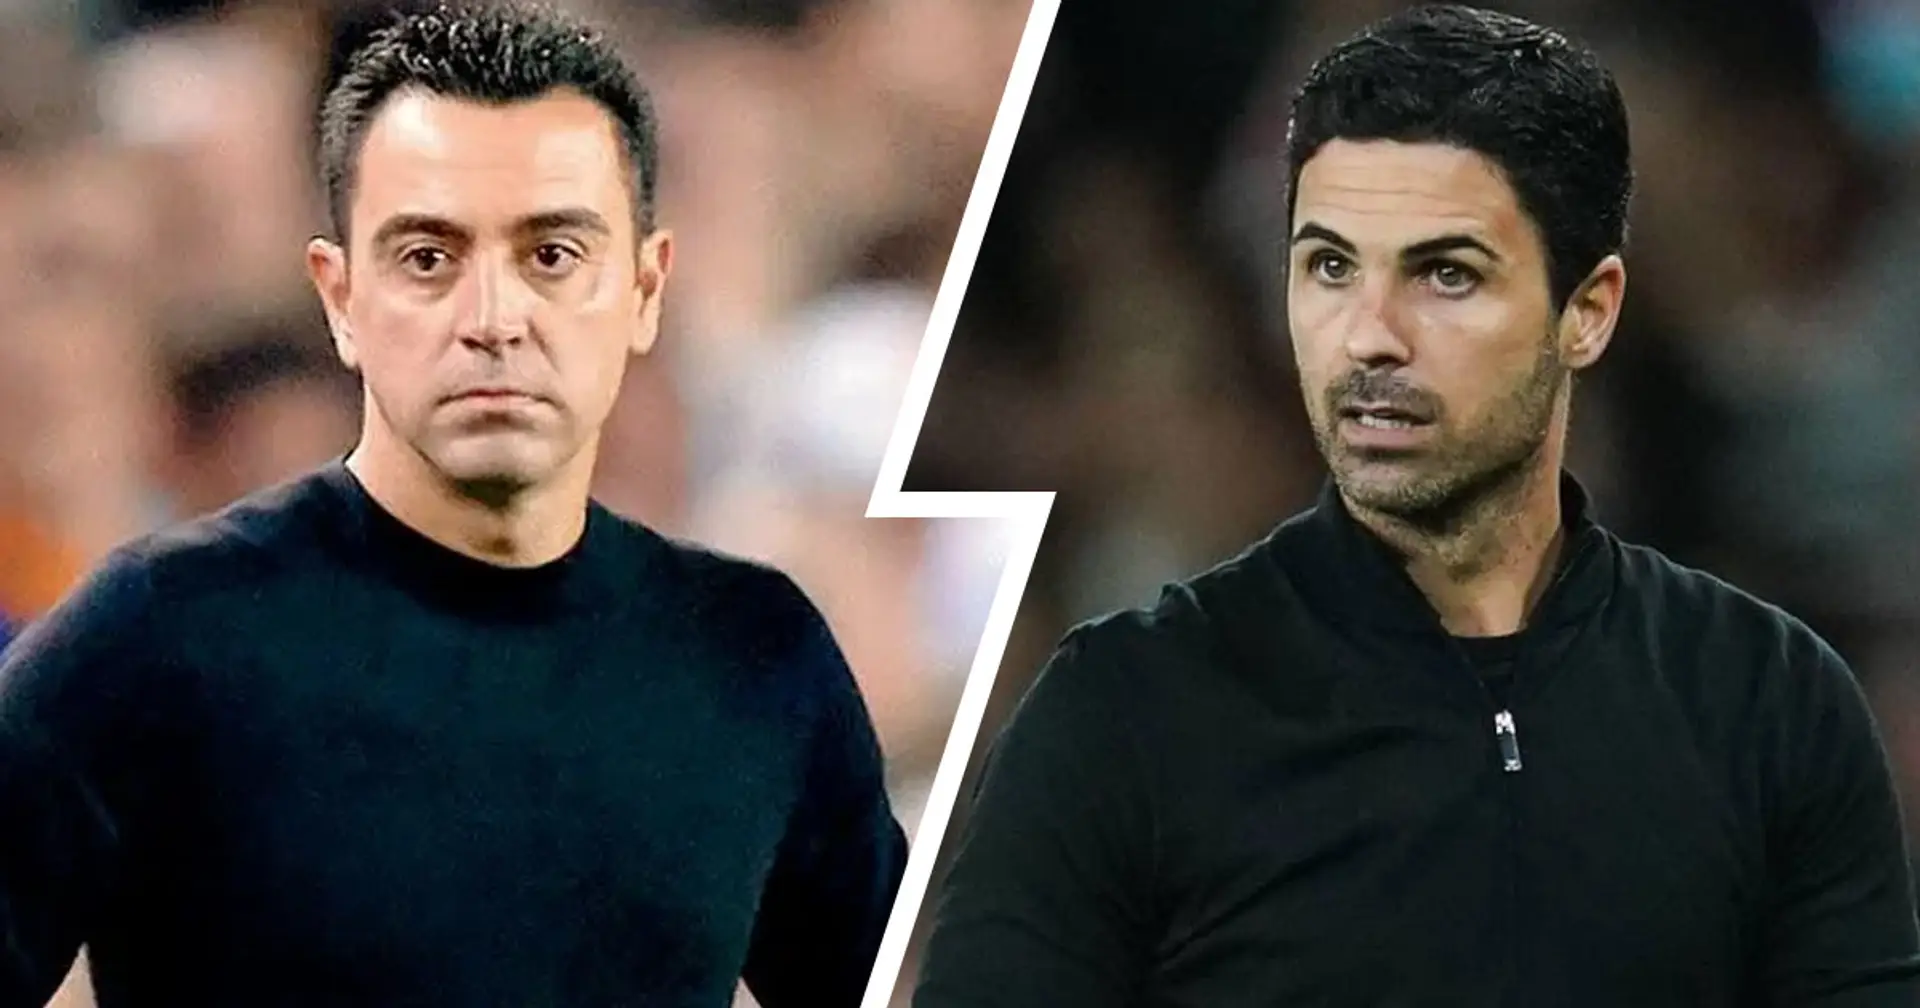 Barcelona eyeing Arteta as Xavi's replacement & 3 more big Arsenal stories you might've missed